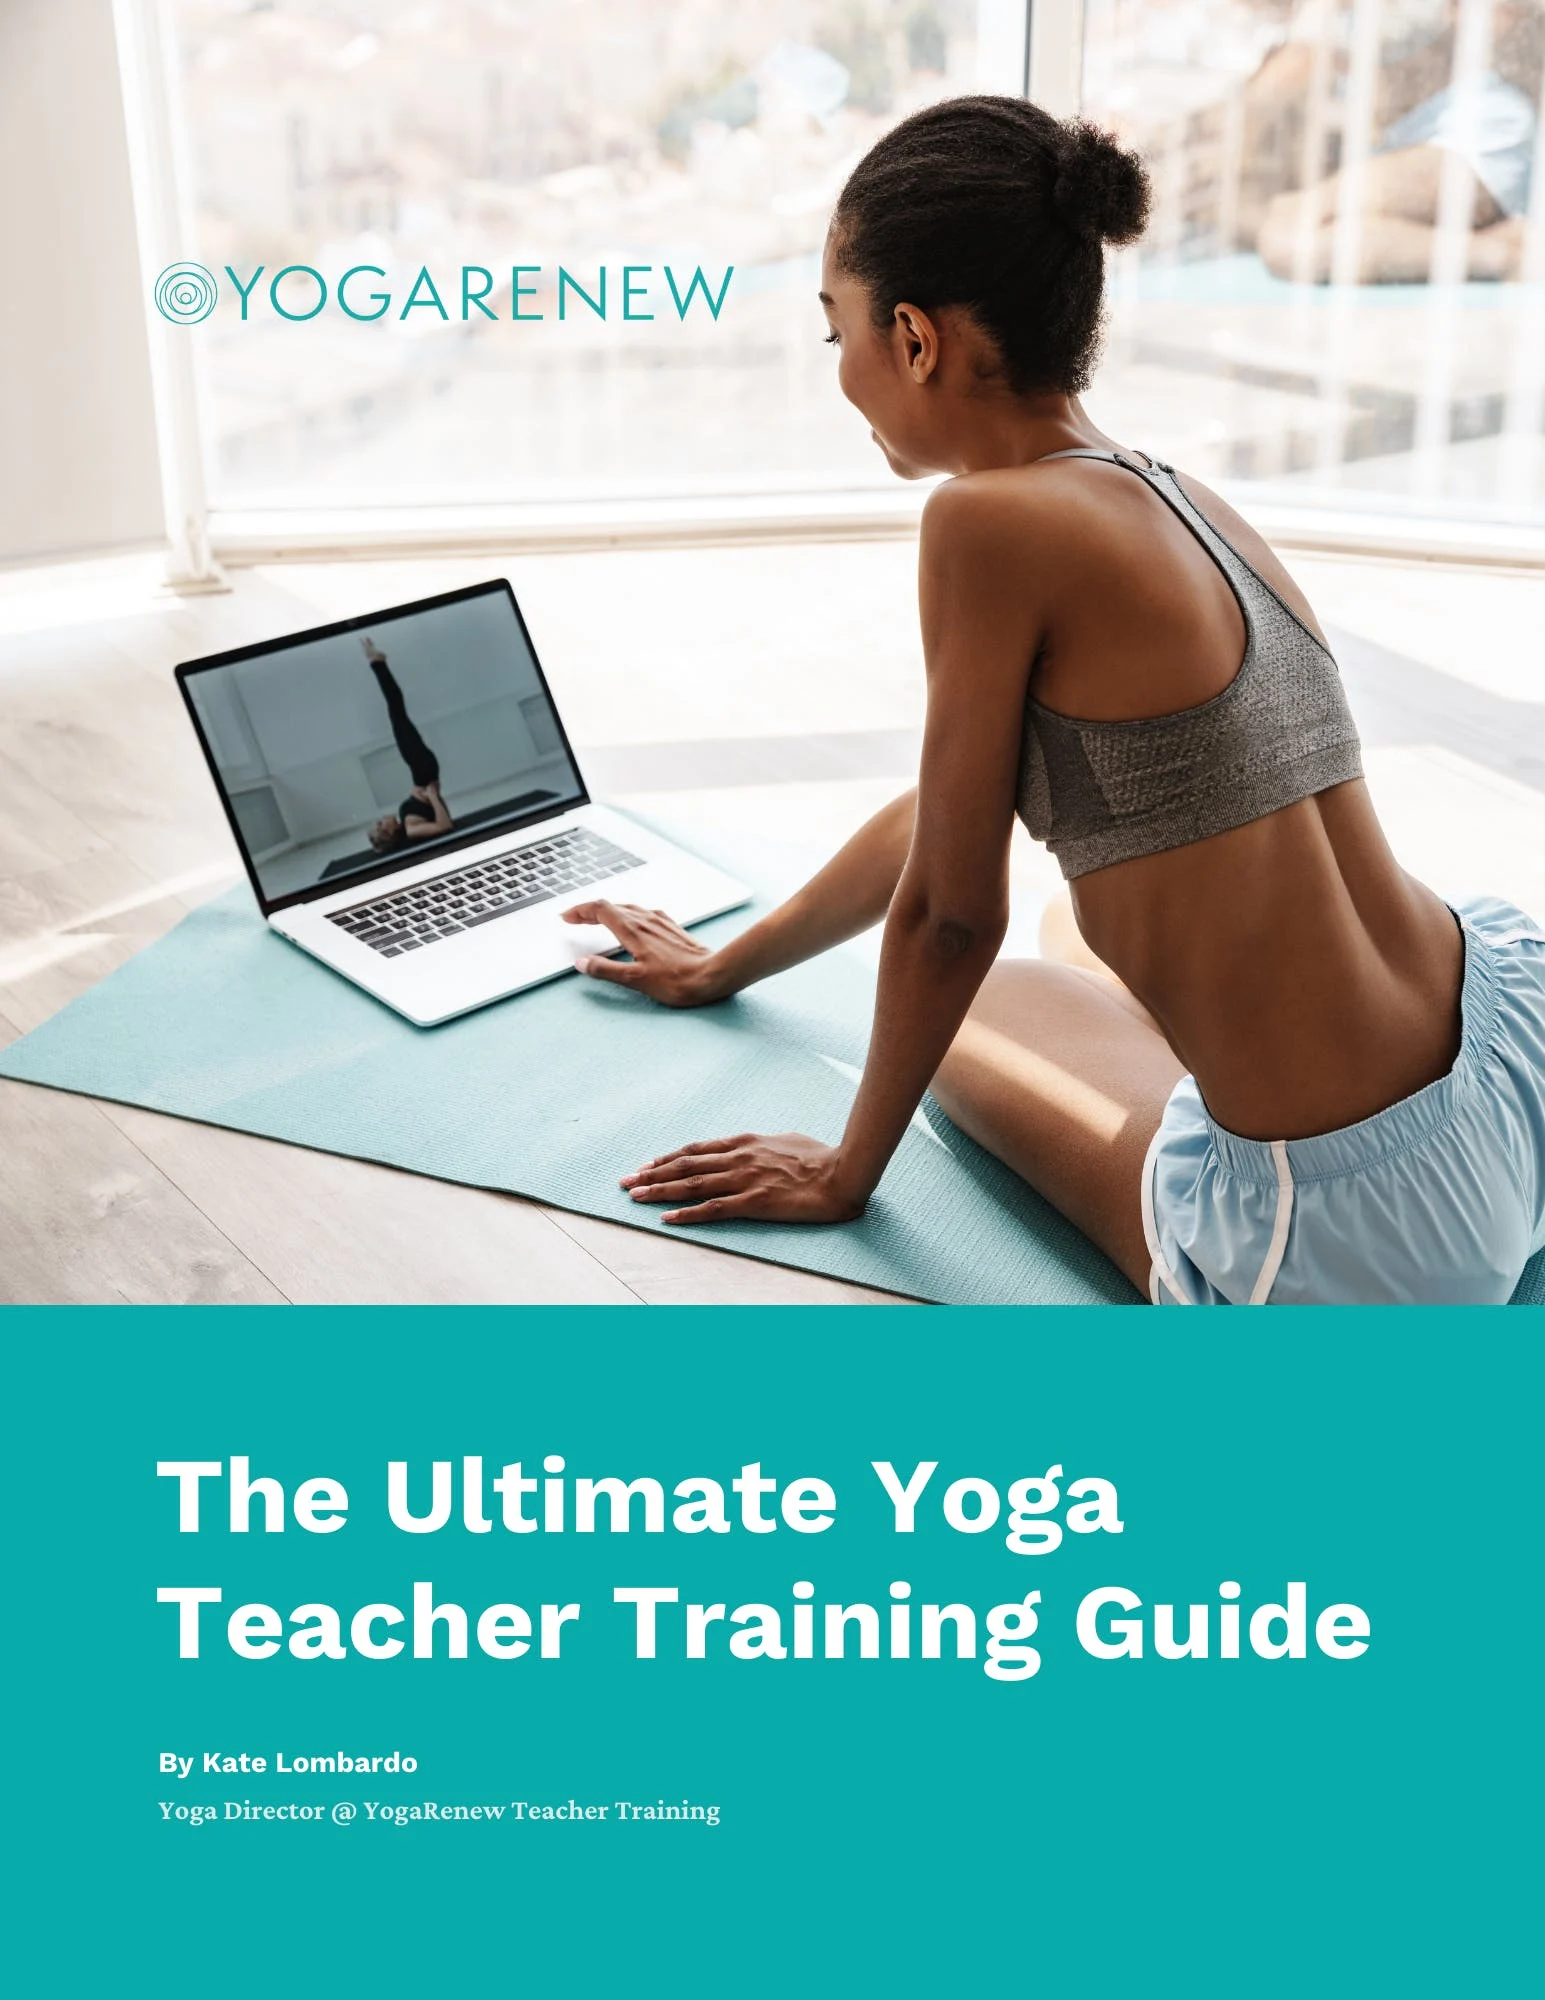 Become a Yoga Instructor in 5 Steps, Get Certified